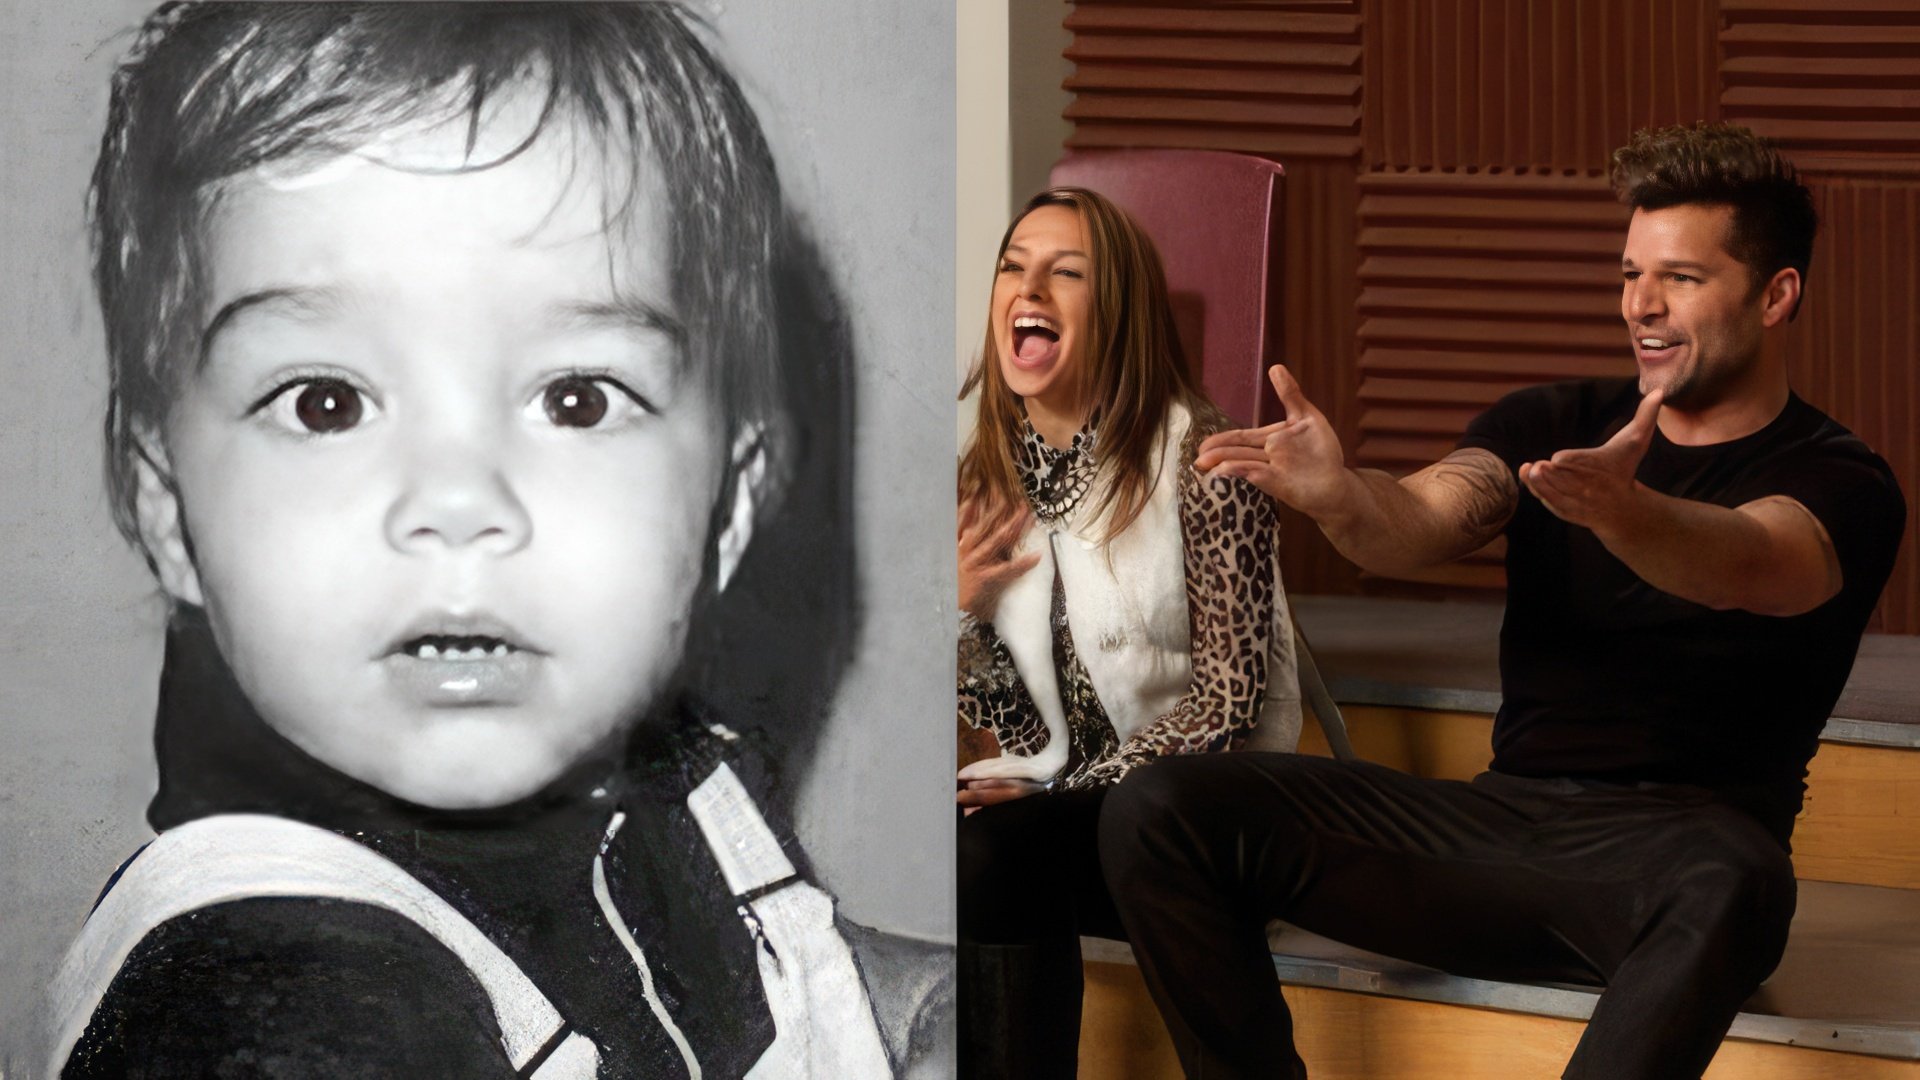 Ricky Martin's reaction to his baby photo